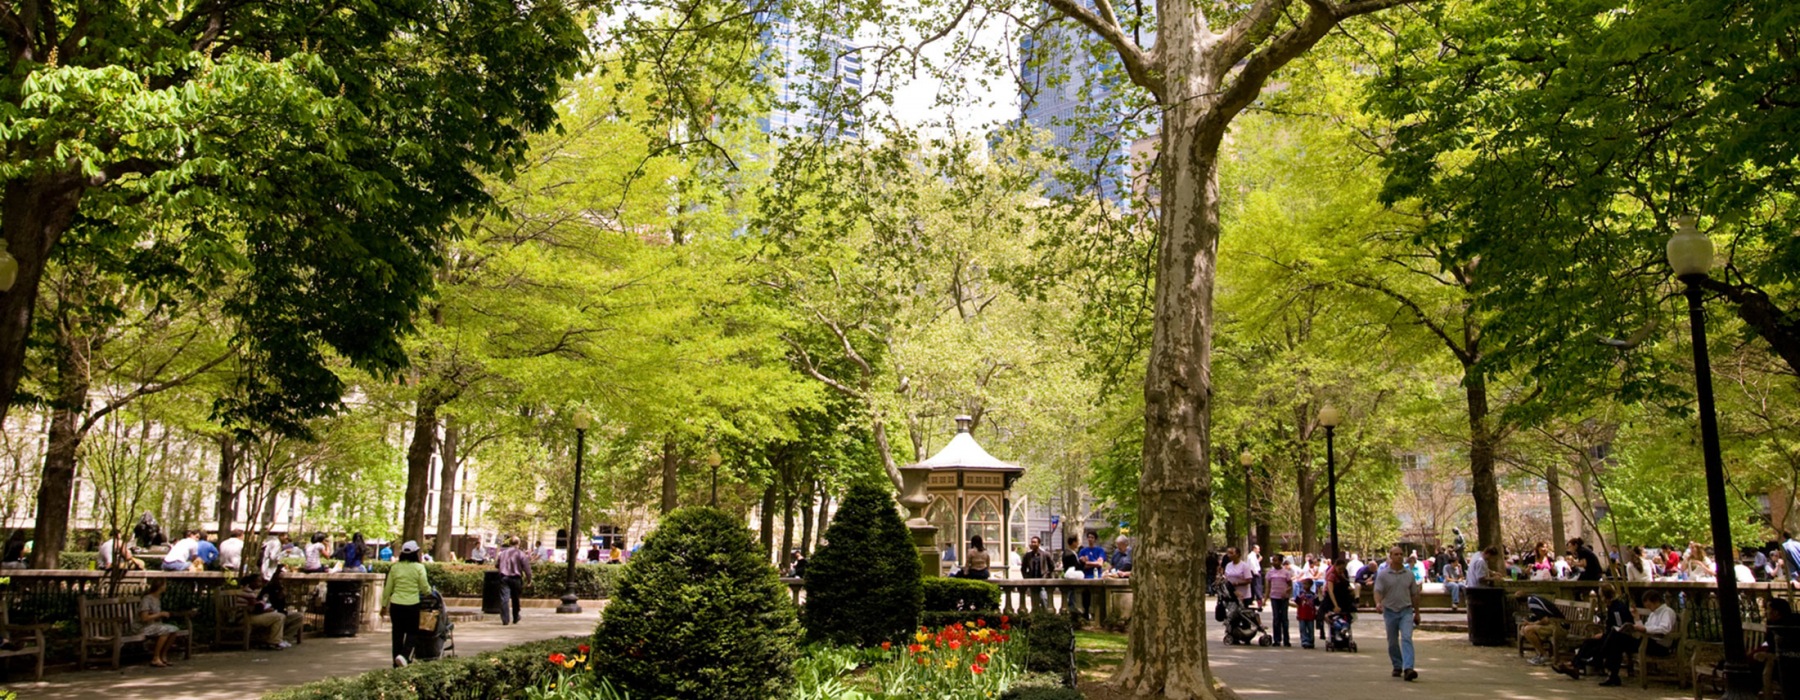 A park with trees in a city